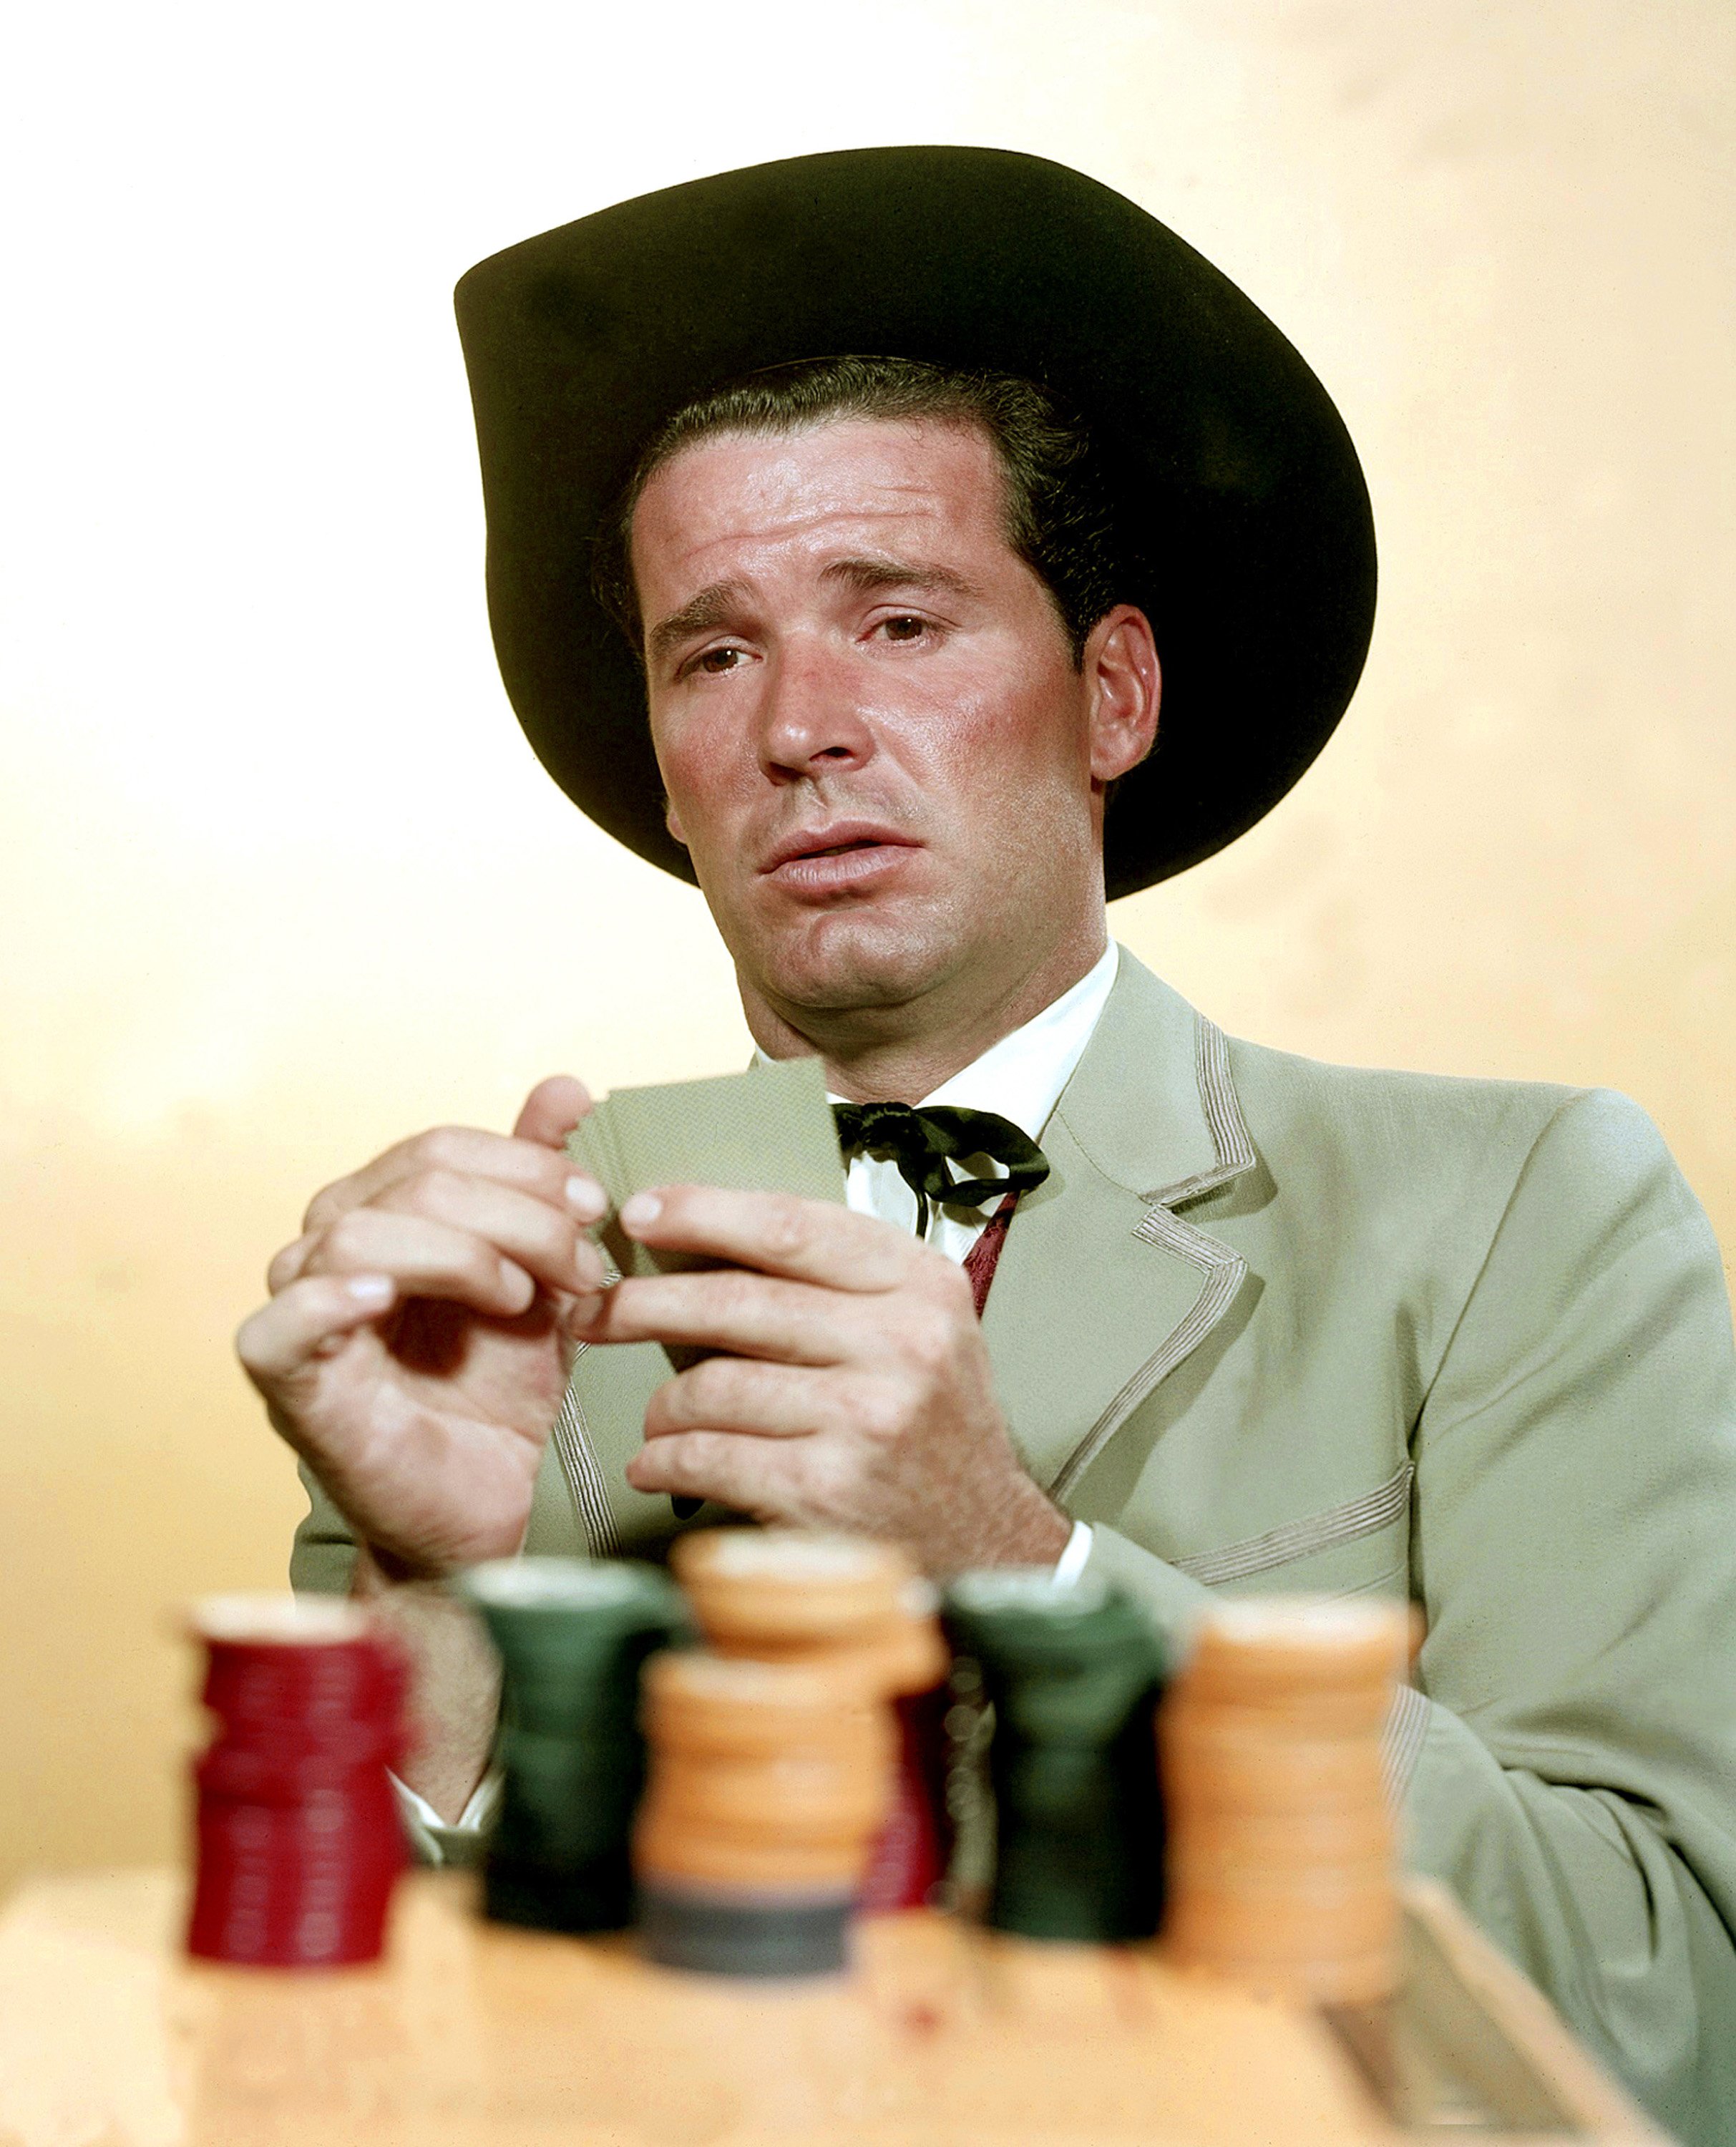 James Garner stars as Bret Maverick, an adventurous, charming, poker-playing gambler who roams the Old West, 1959. | Source: Getty Images